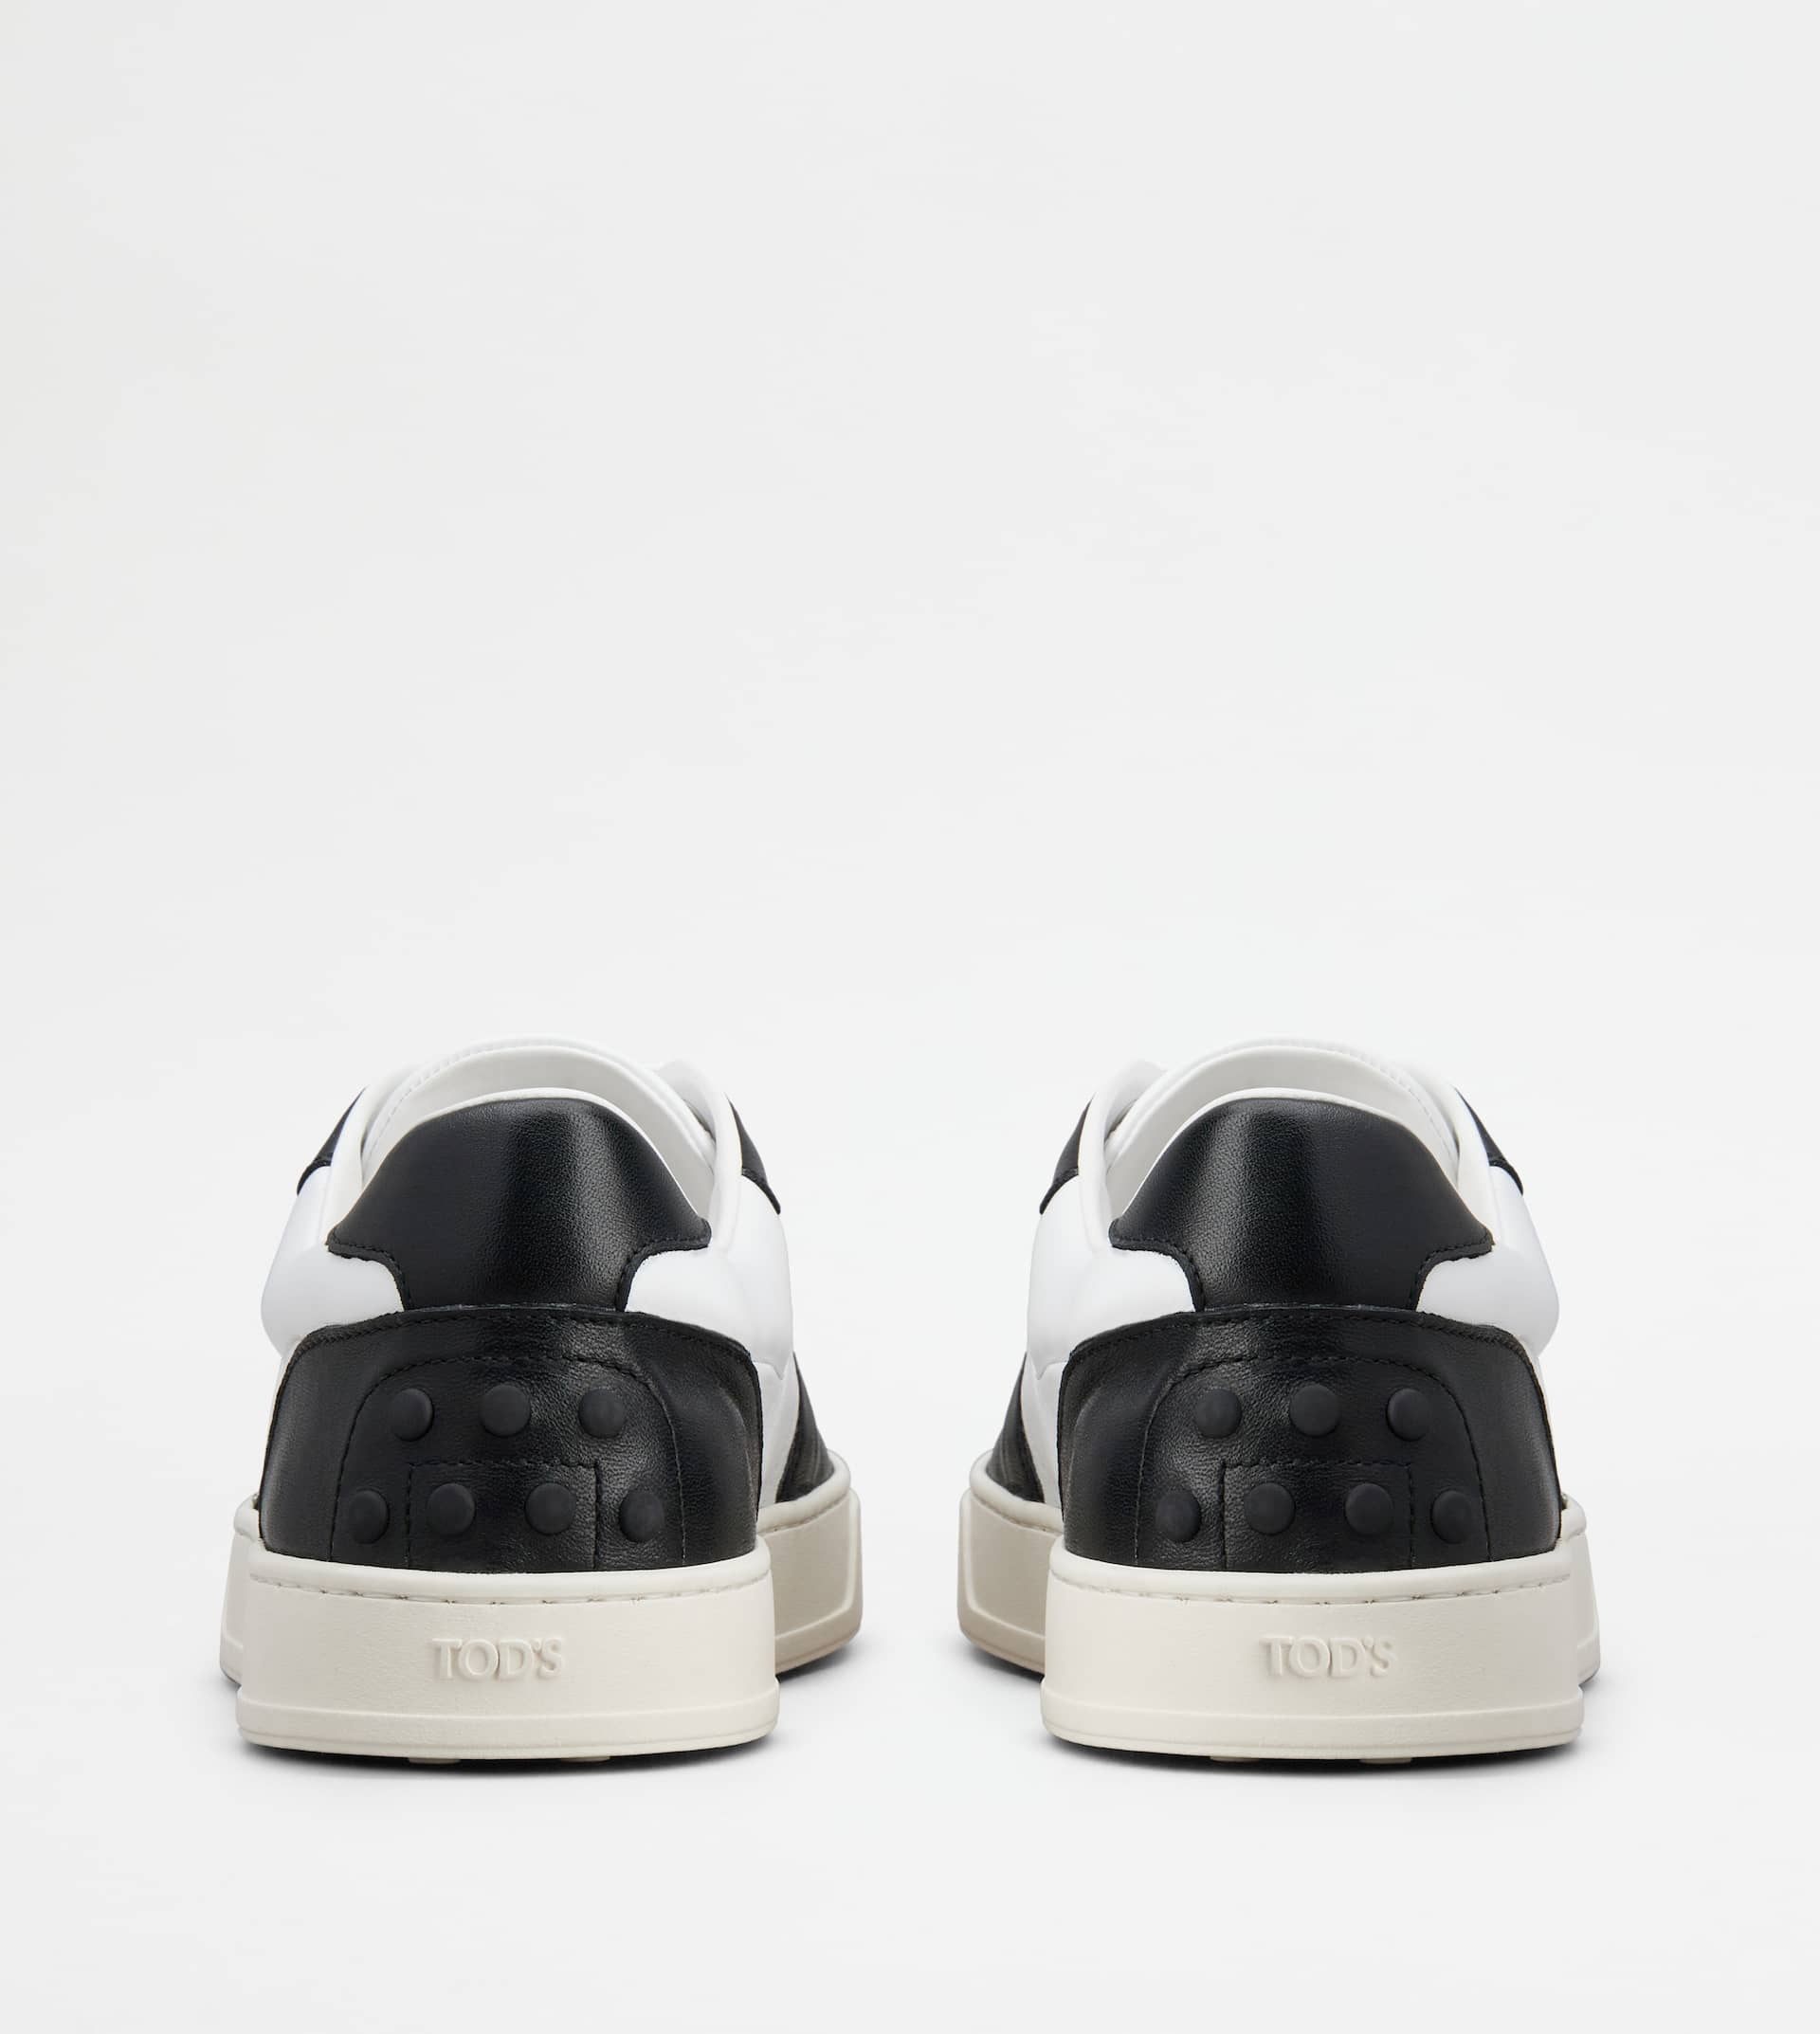 SNEAKERS IN LEATHER - WHITE, BLACK - 2